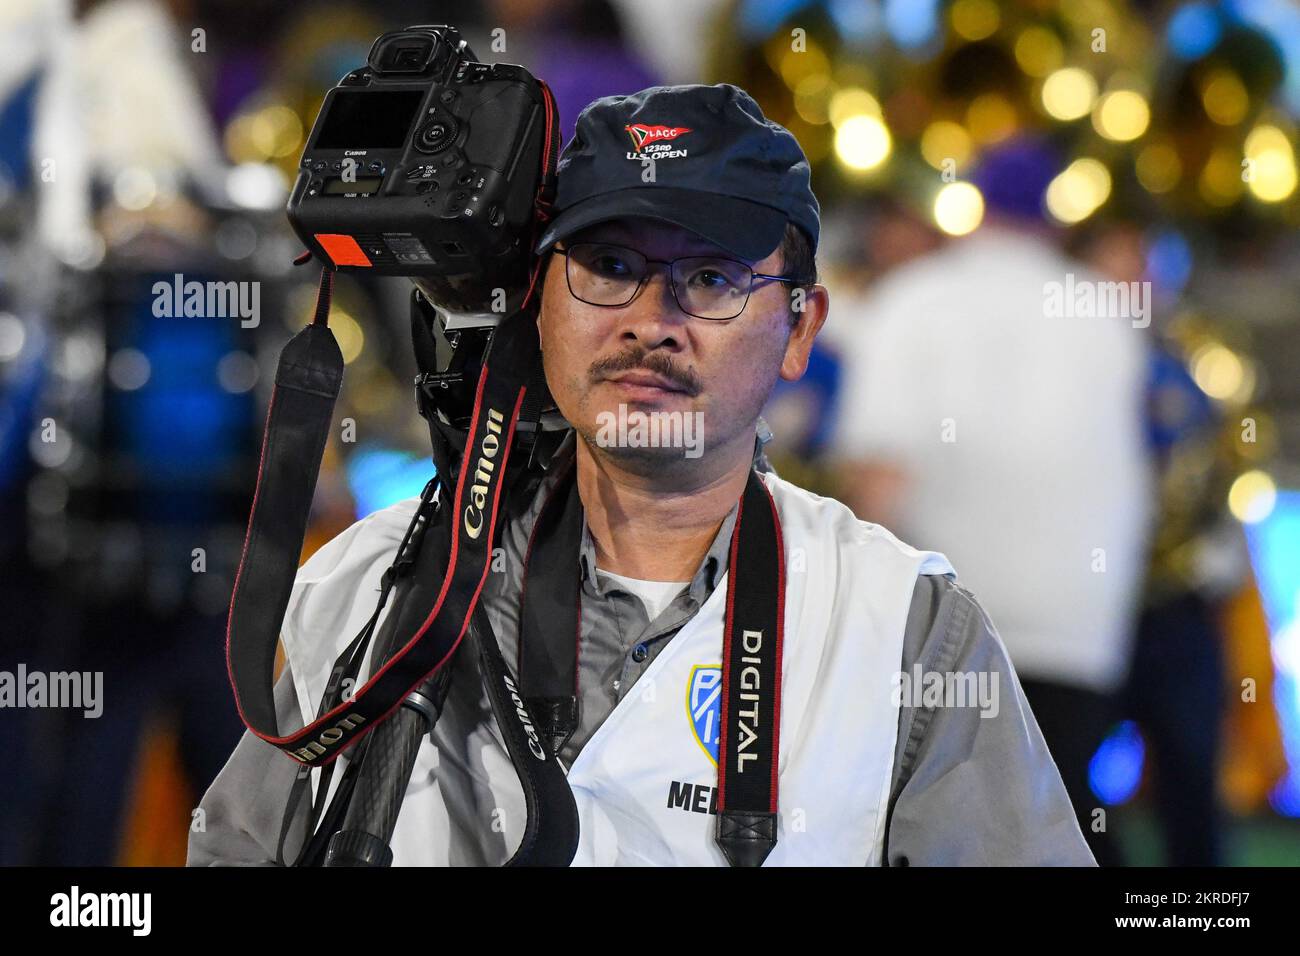 Photographer Ringo Chiu walks on the sidelines during an NCAA football game, Friday, Sep. 30, 2022, in Pasadena, Calif. The UCLA Bruins defeated Washi Stock Photo